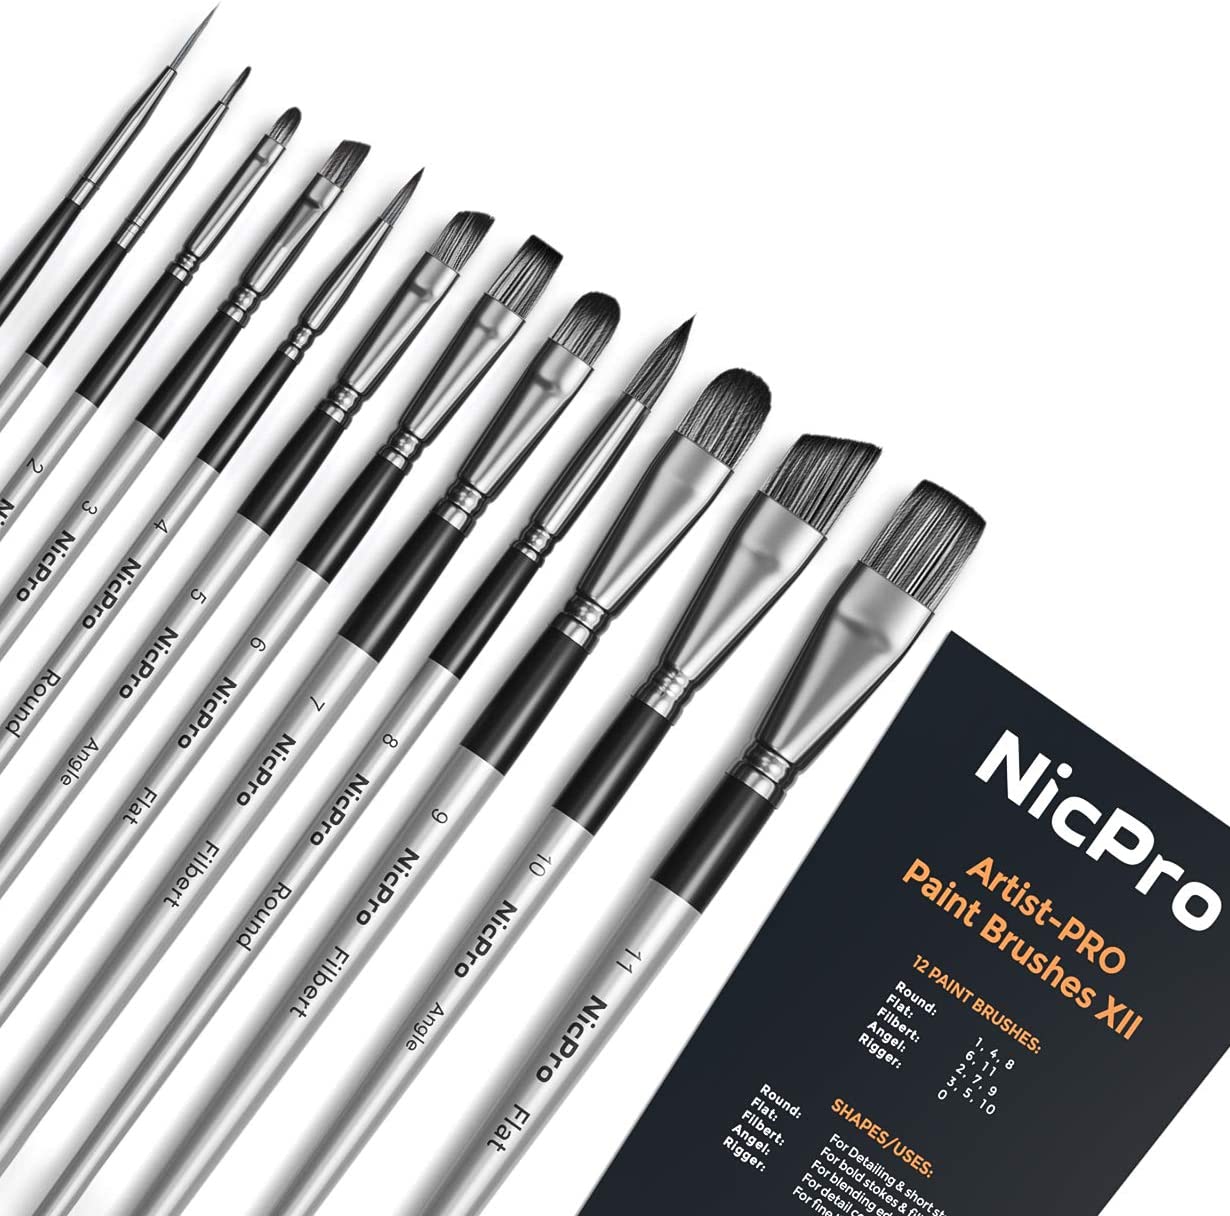 MG015 Nicpro Micro Detail Paint Brush Set,15 Small Professional Miniature  Fine Detail Brushes for Watercolor Oil Acrylic,Craft Models